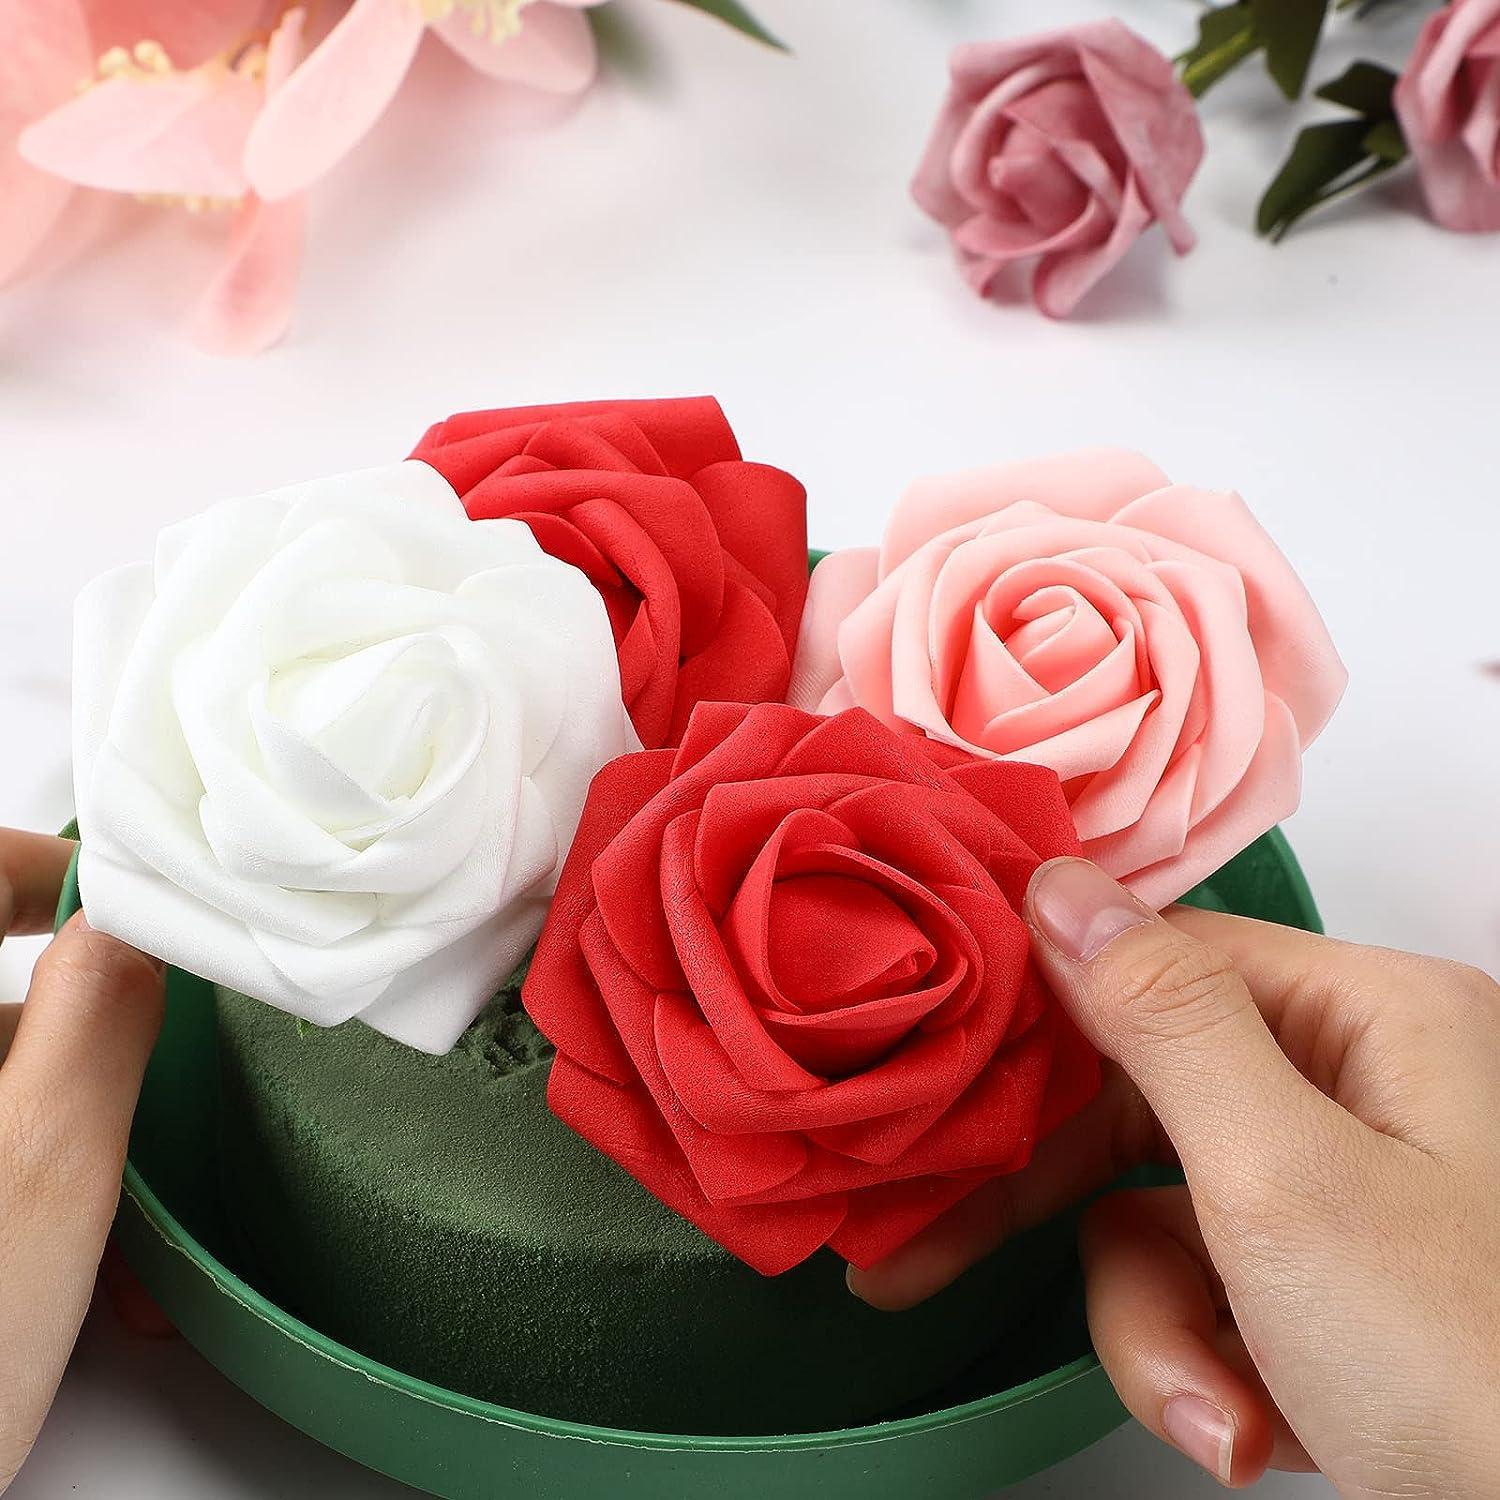 Perthlin 12 Pieces DIY Flower Foam with Bowl Kit 6.5 Inch Large